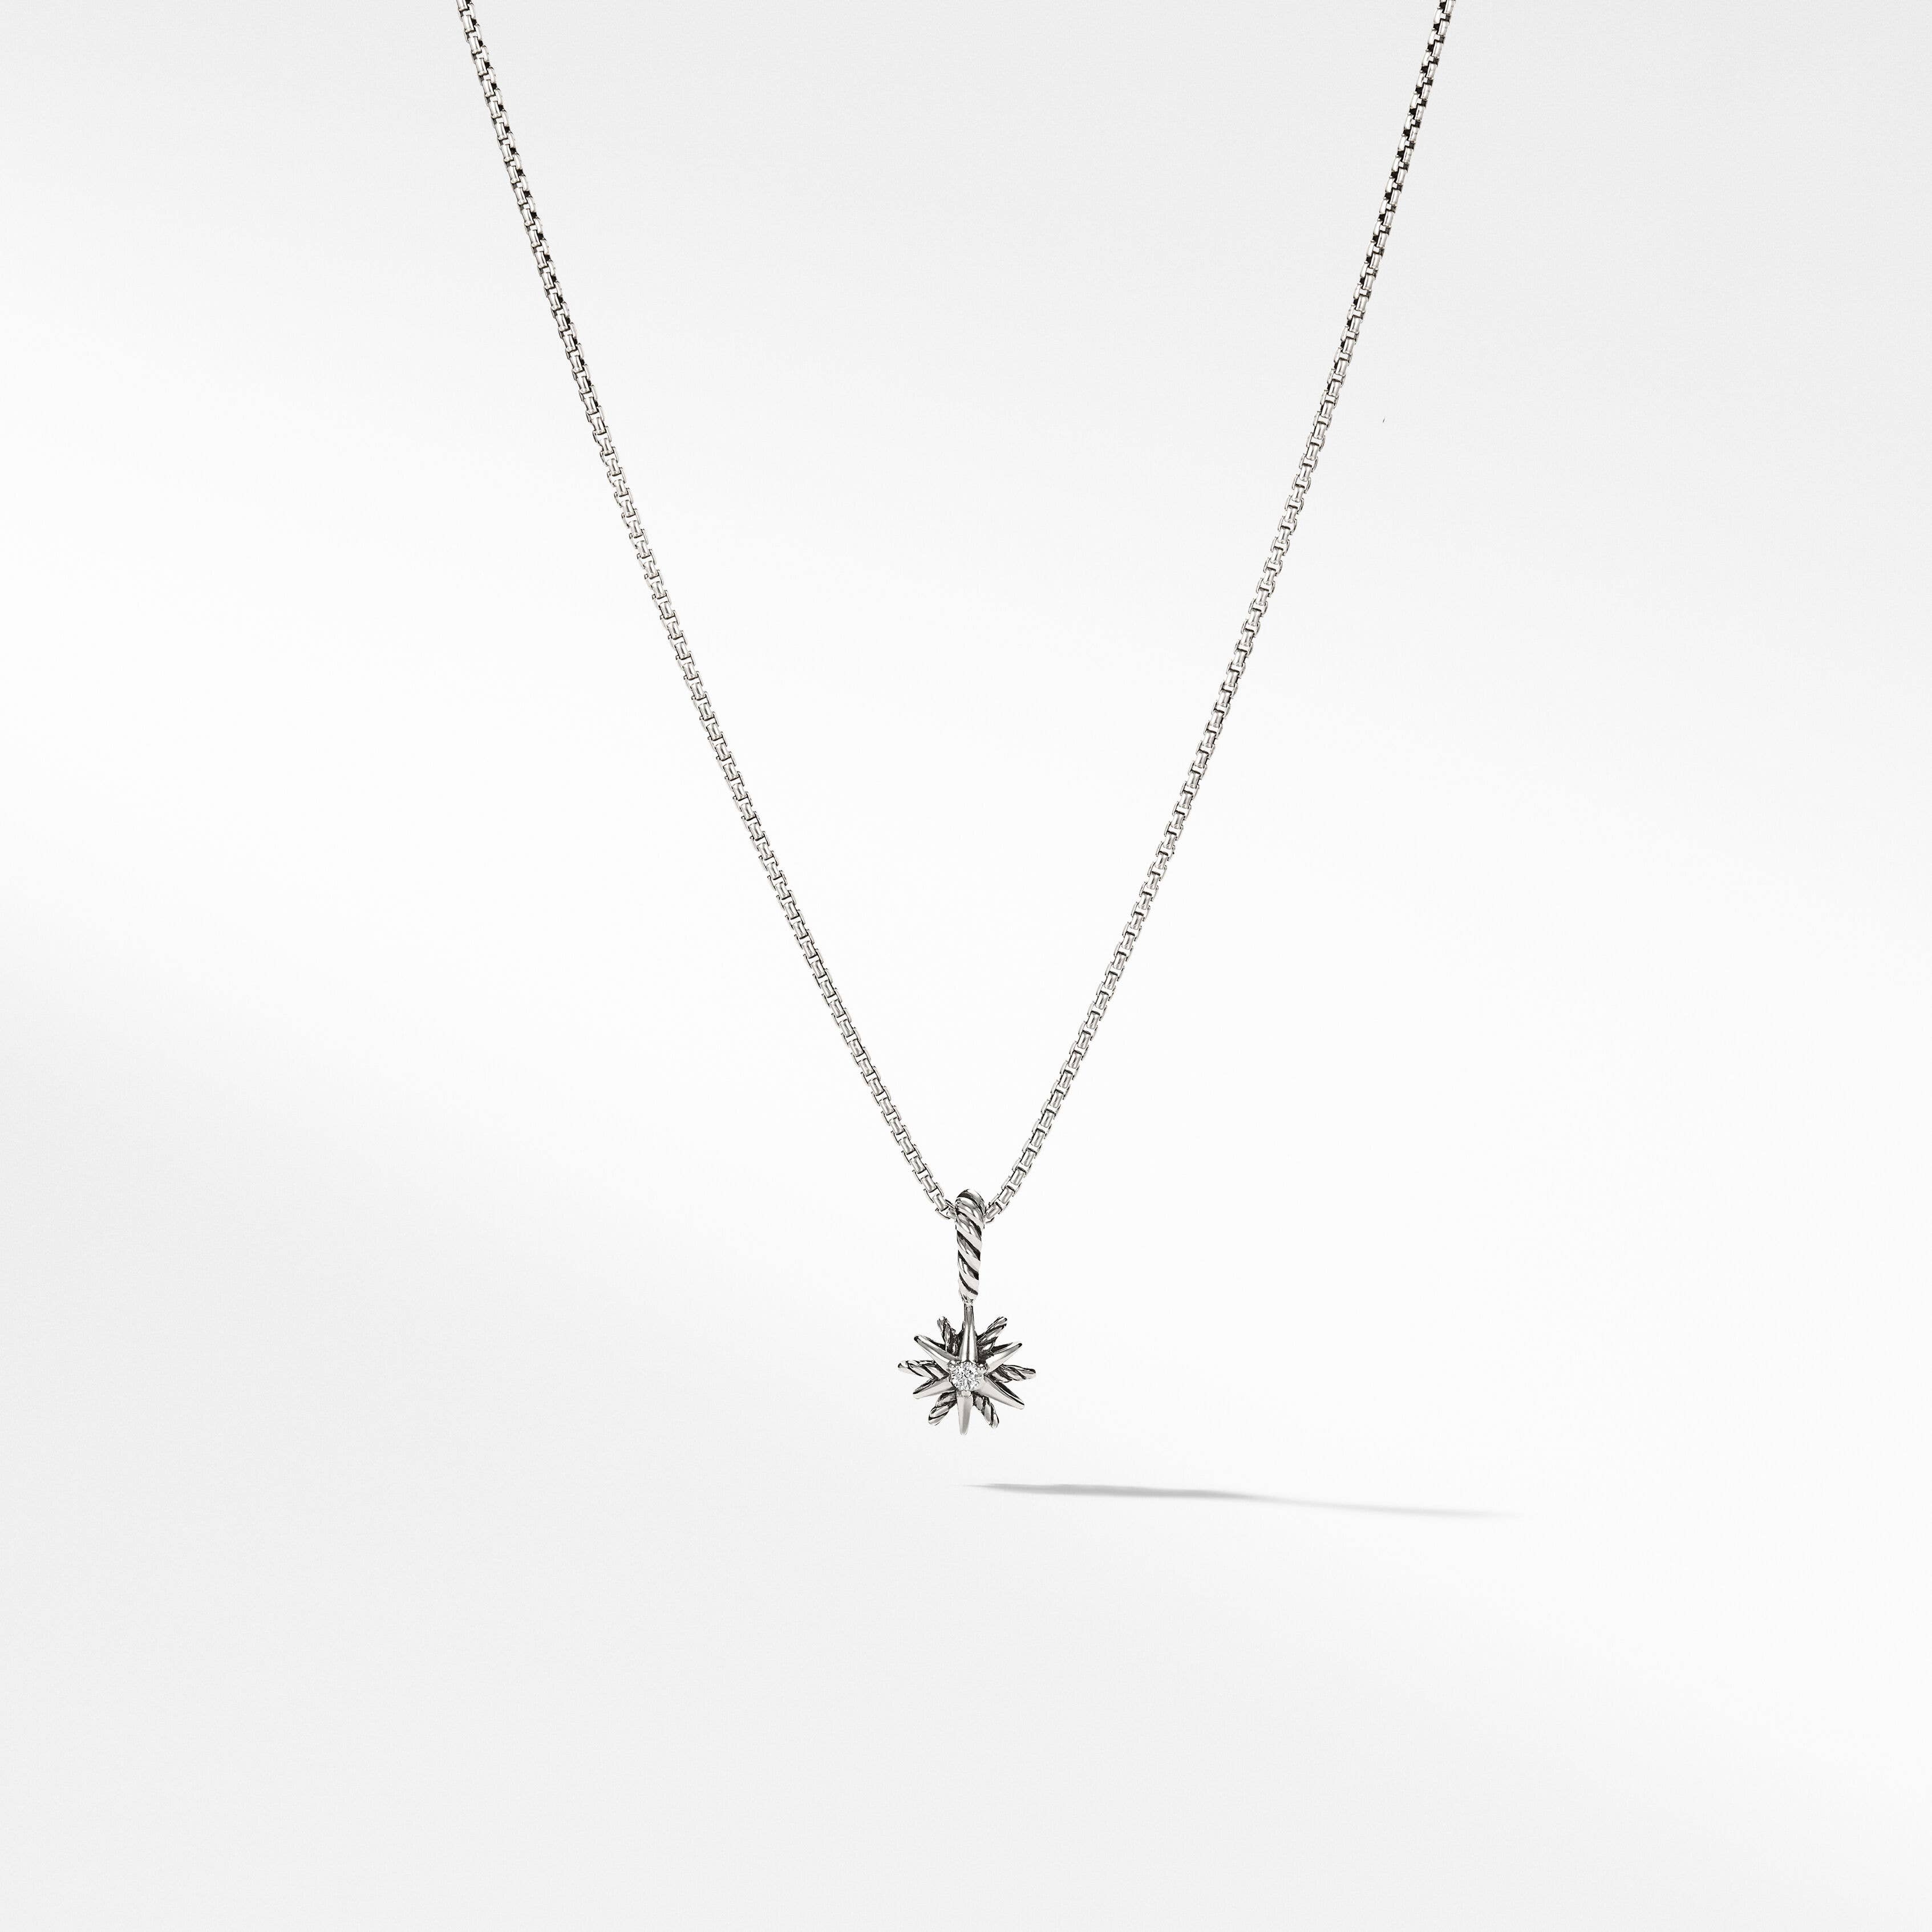 Starburst Kids Necklace in Sterling Silver with Center Diamond